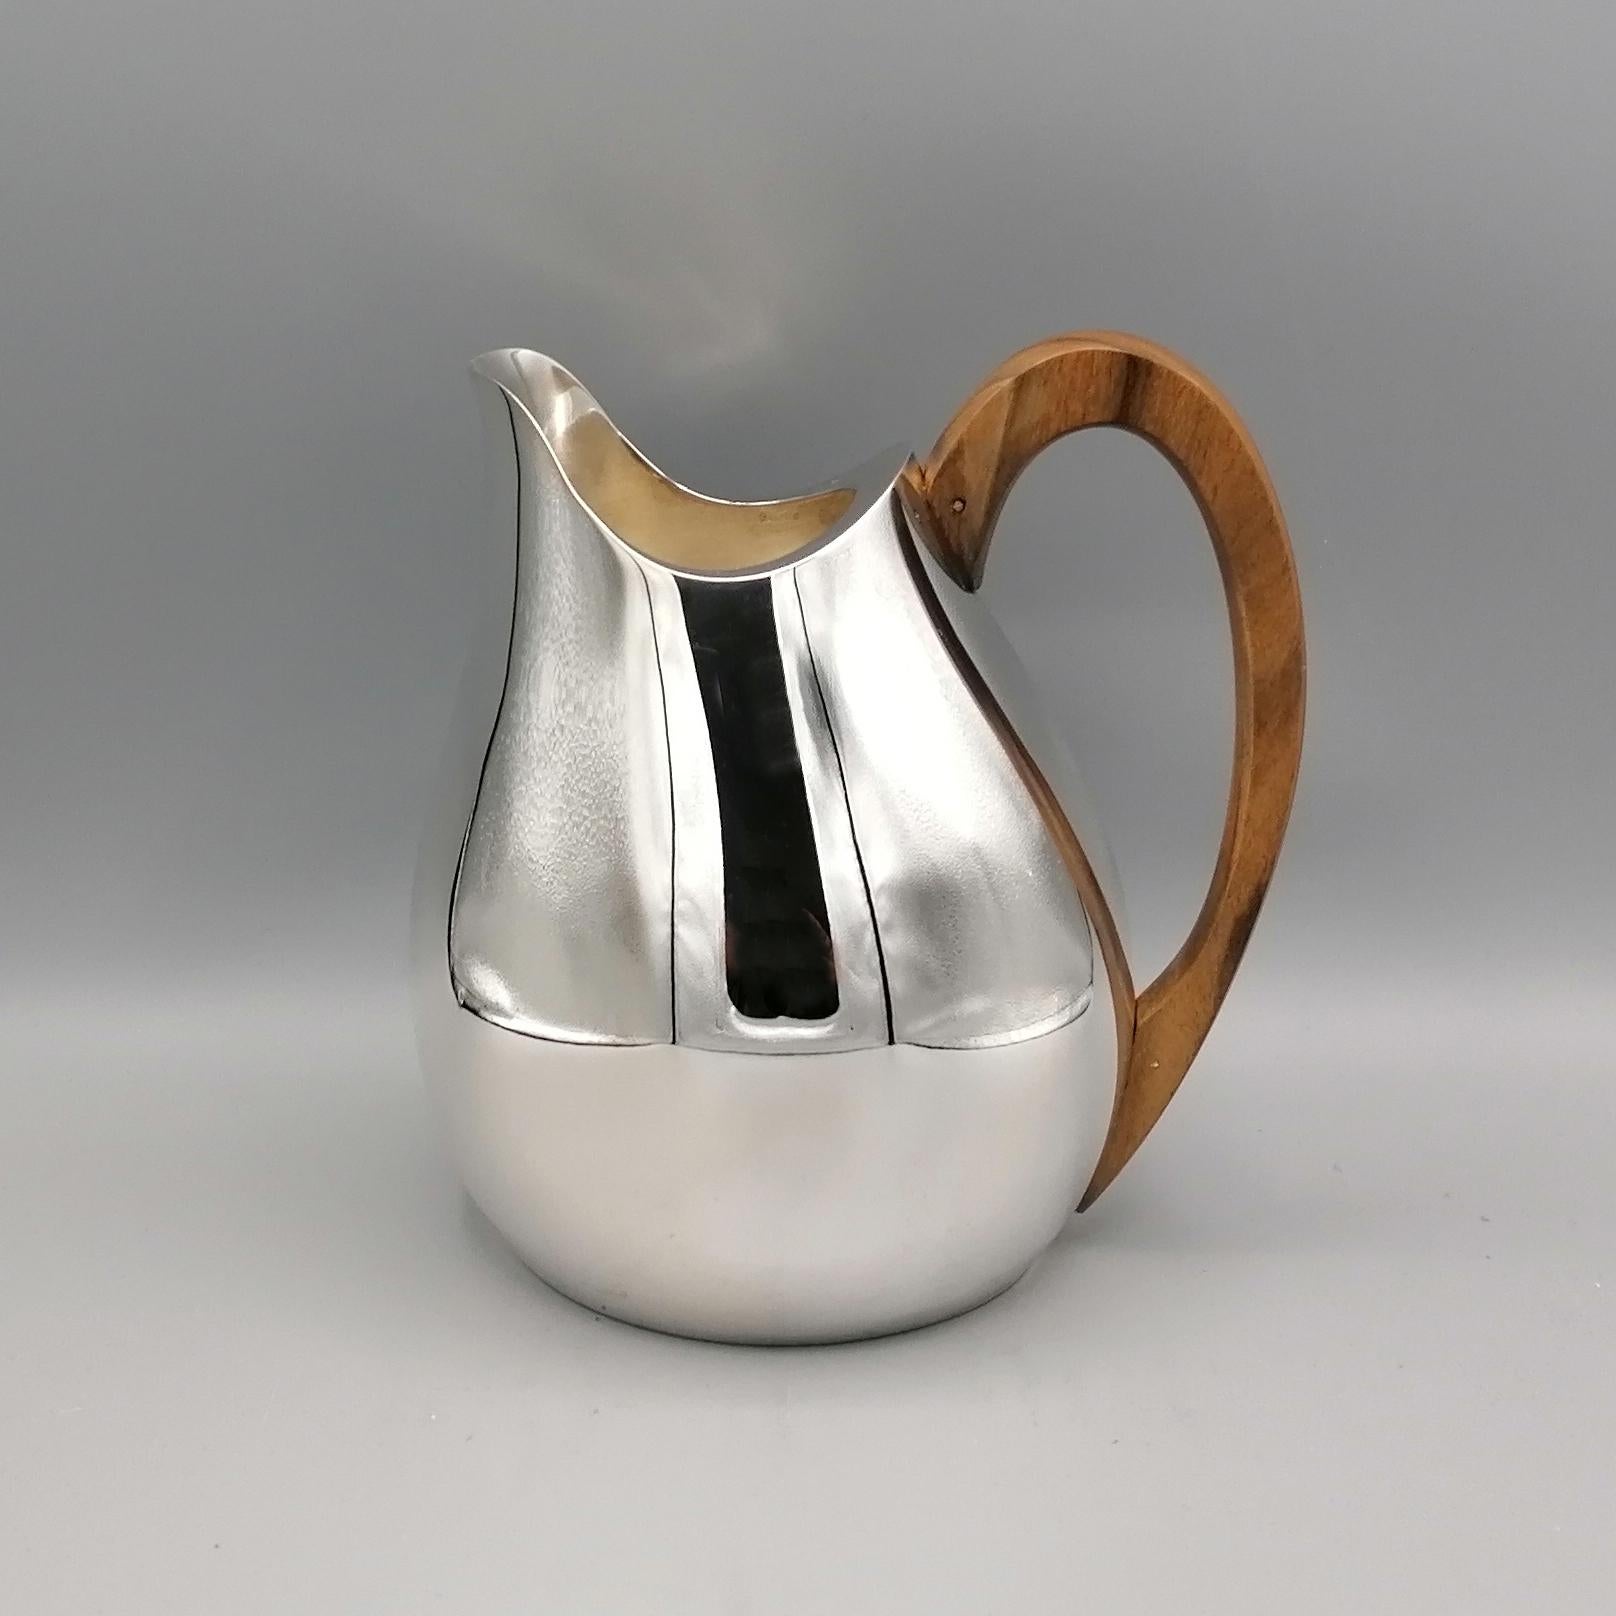 Contemporary 21st Century Italian Sterling Silver Jug with wood Handle